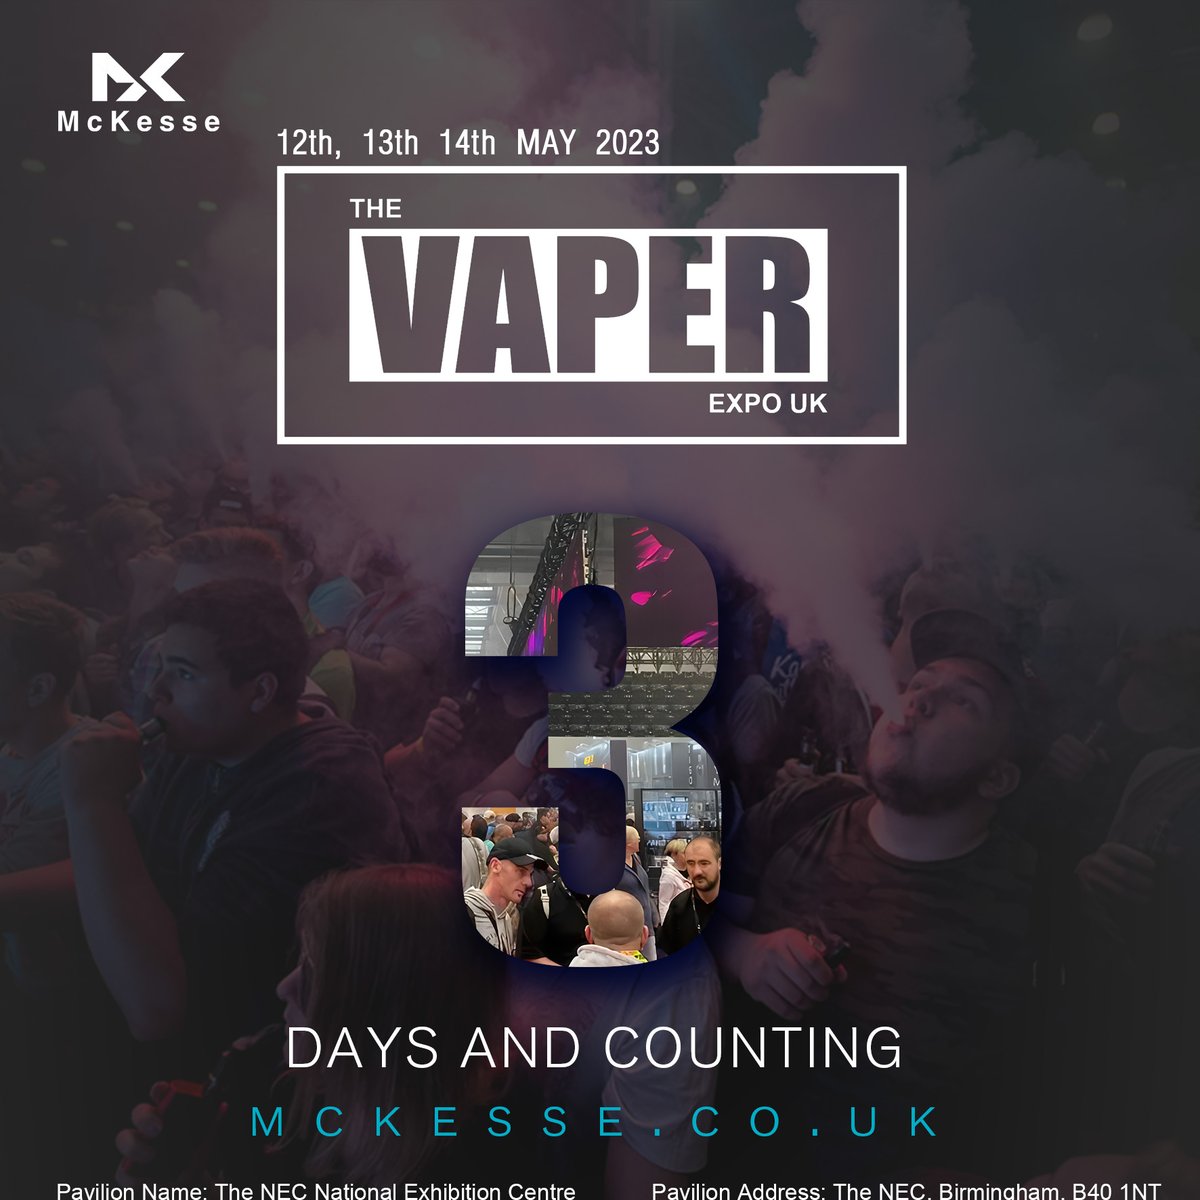 ‼ ️Exhibition Announcement‼ ️
🎉🎉3 days countdown⌛
🎁🥳 We will prepare gifts for those who arrive at our event booth 🎁🤩
#VaperExpoUK
#vaperexpo
#vape2023
#vape
#vaperexpouk
#vapecommunity
#vapeadvocacy
#vaperexpouk
#vaperexpouk2023
#wereback
#areyouready
#vapercommunity